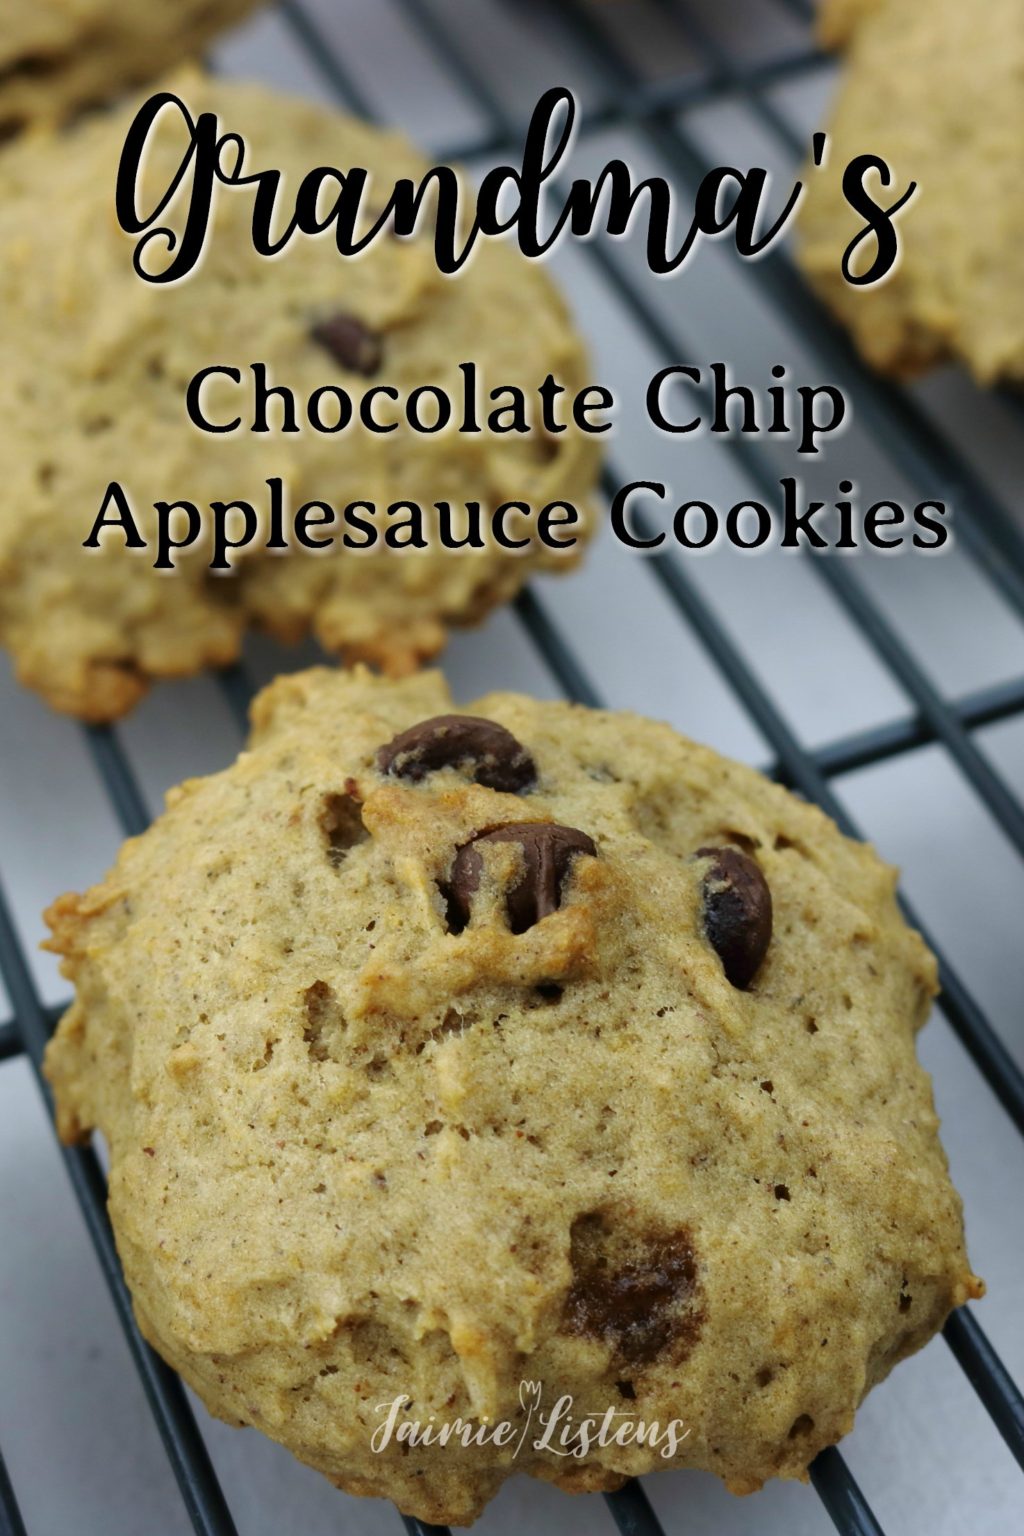 Floating Chocolate Chip Applesauce Cookies – Jaimie Listens: Soft and spongy chocolate chip cookies that everyone fights over! They are a hybrid of chocolate chip banana bread and regular chocolate chip cookies. The perfect cookie if you like them to be soft and stay soft without being undercooked. Grandma always had these cookies ready for us when we would come to visit.